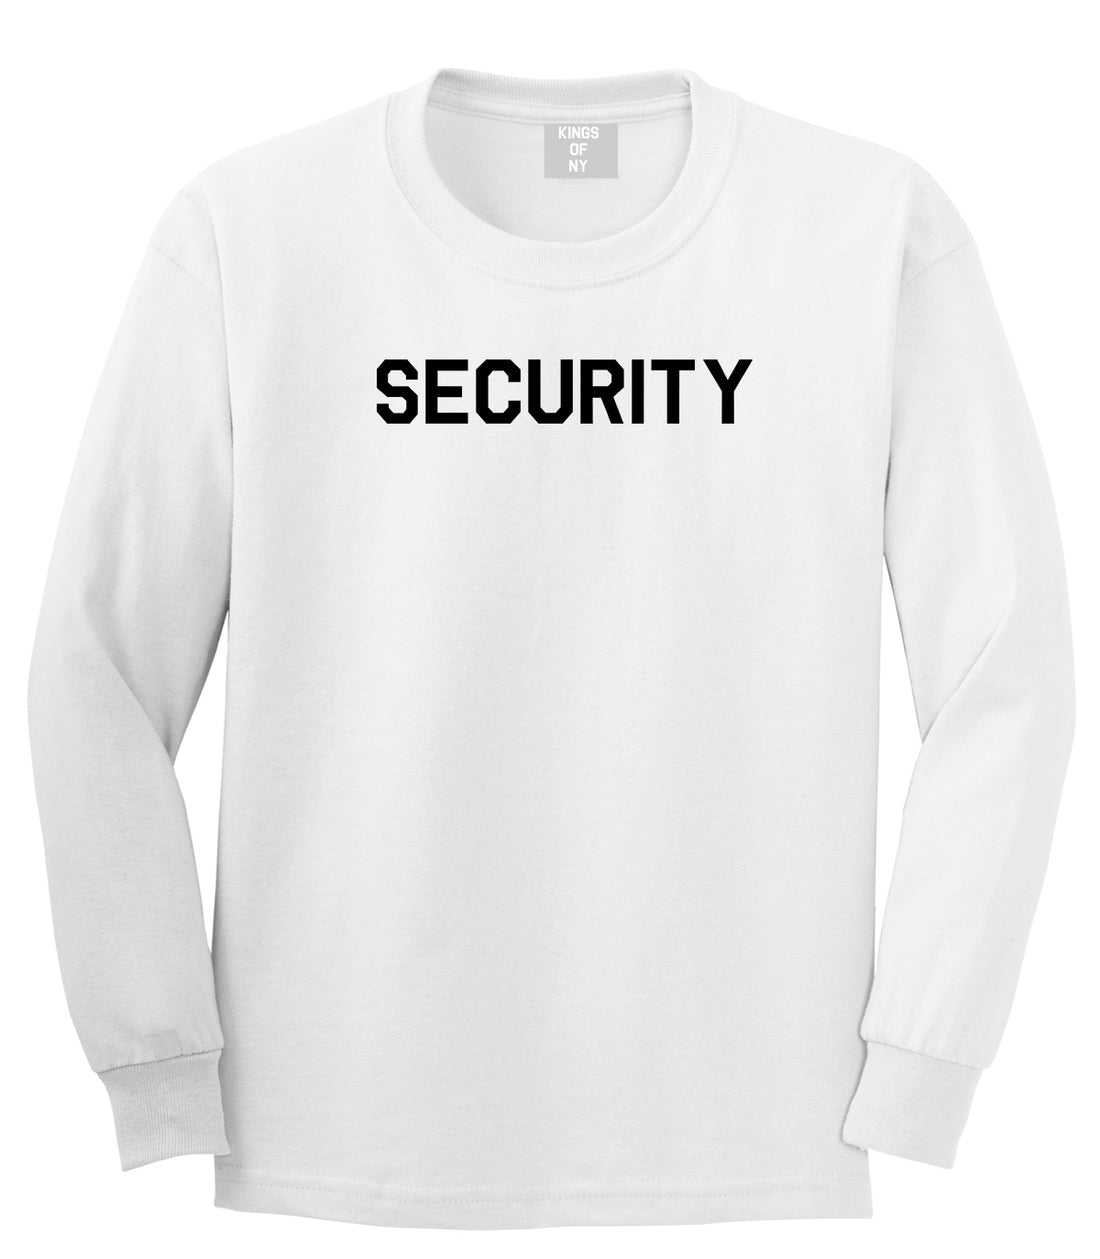 Event Security Uniform Mens White Long Sleeve T-Shirt by KINGS OF NY